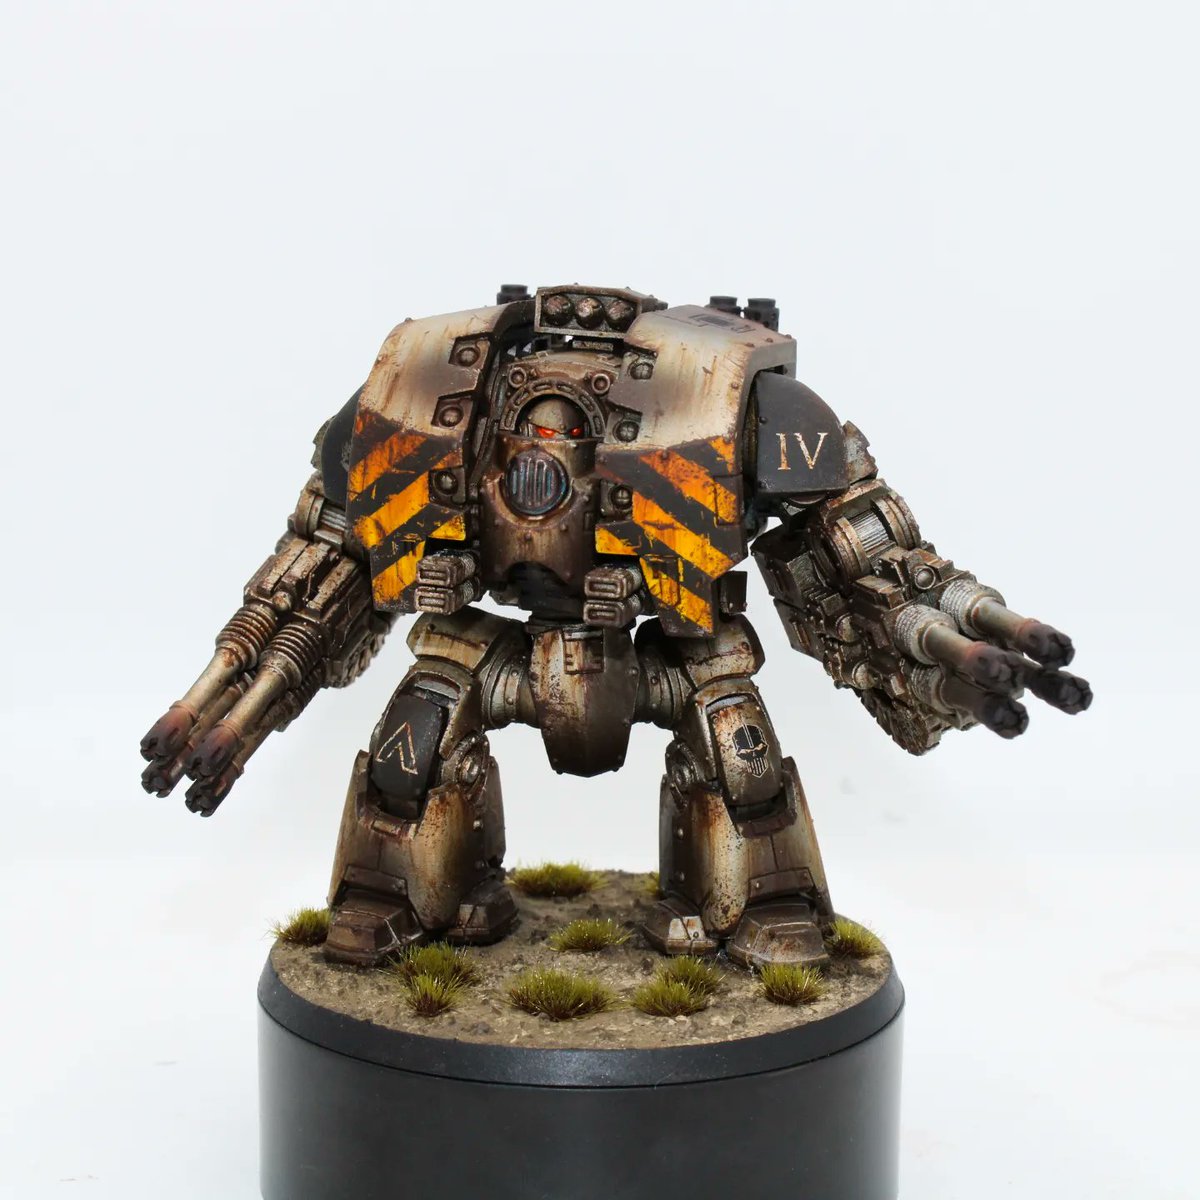 You can forget that Imperial Fists Ballistus Dreadnought because here's an Iron Warriors Leviathan Dreadnought from the 31st Millenium who really knows how to besiege a fortress!

#ironwarriors #spacemarines #chaosspacemarines #leviathan #dreadnought